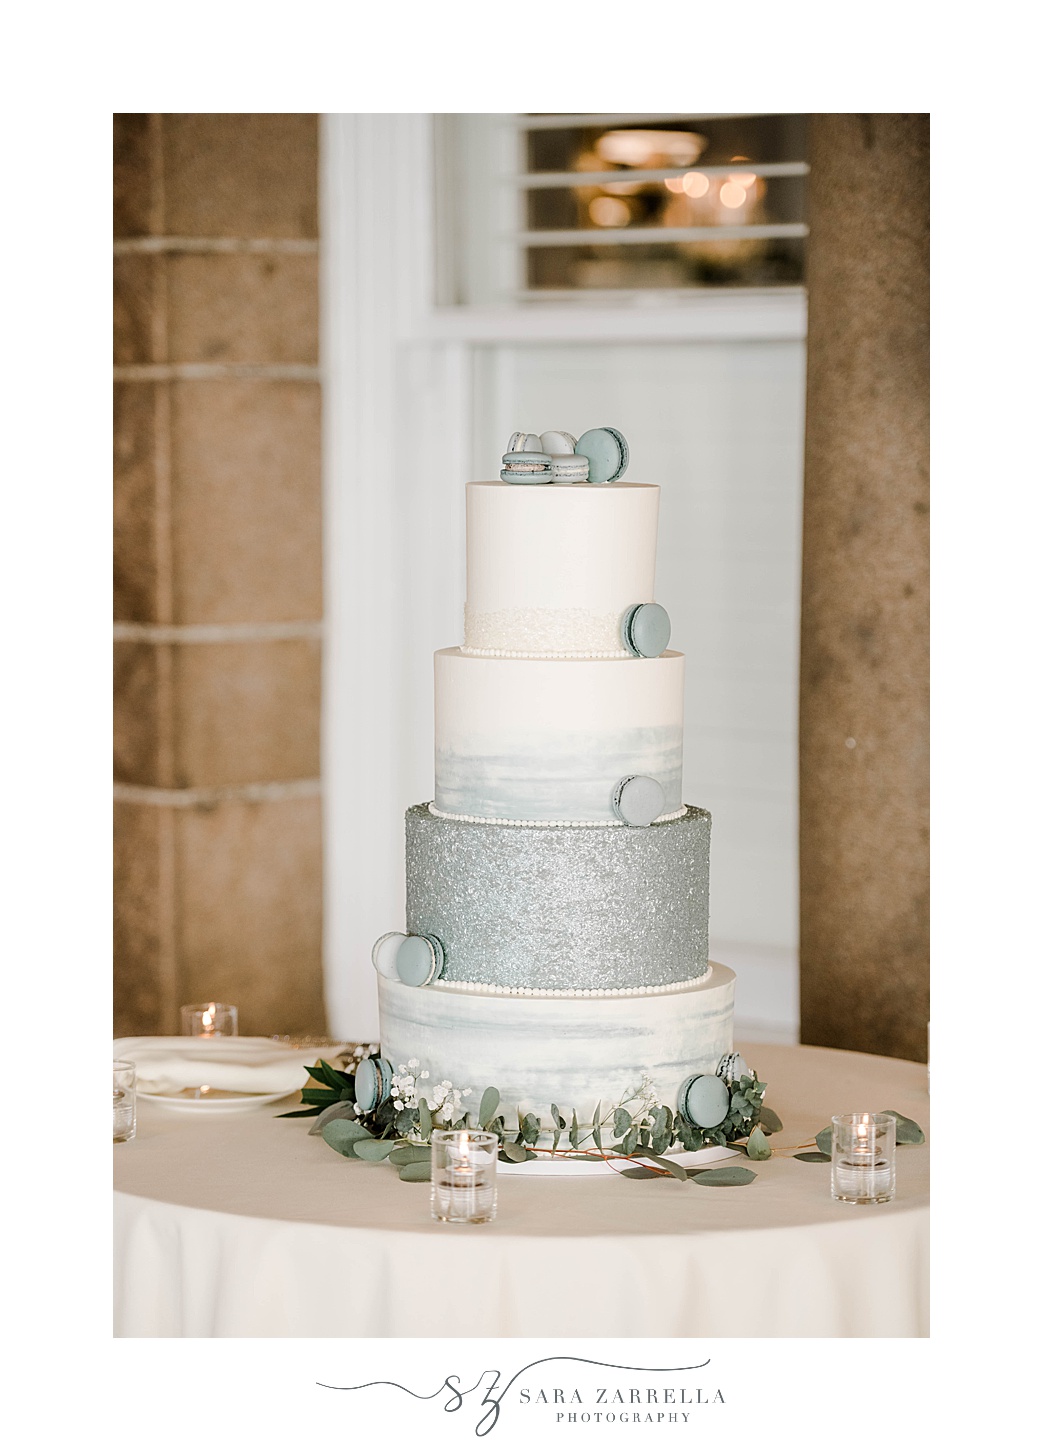 tiered wedding cake with metallic blue bottom layer and macrons on top